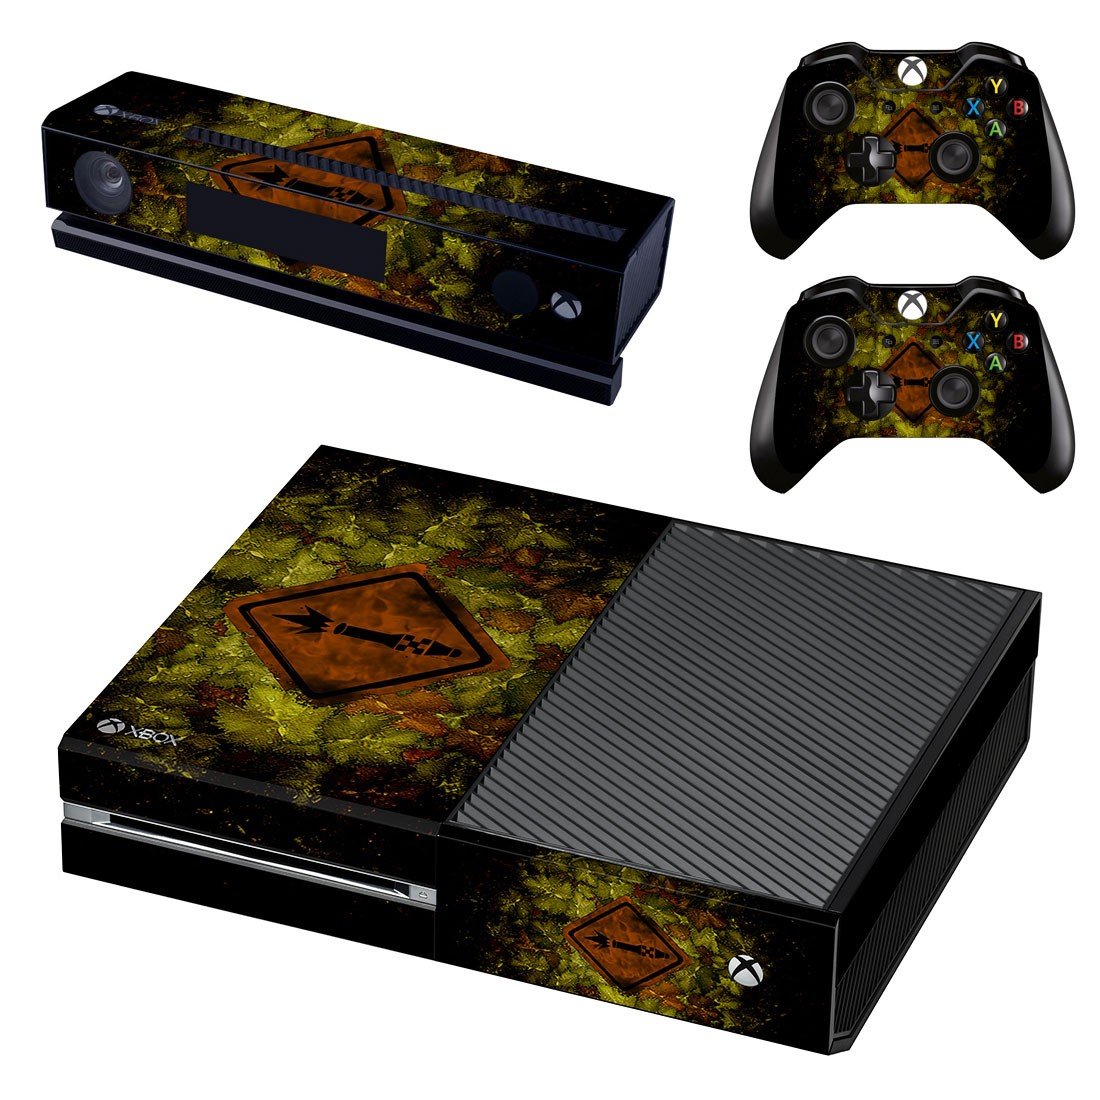 Xbox One And Controllers Skin Cover Tech